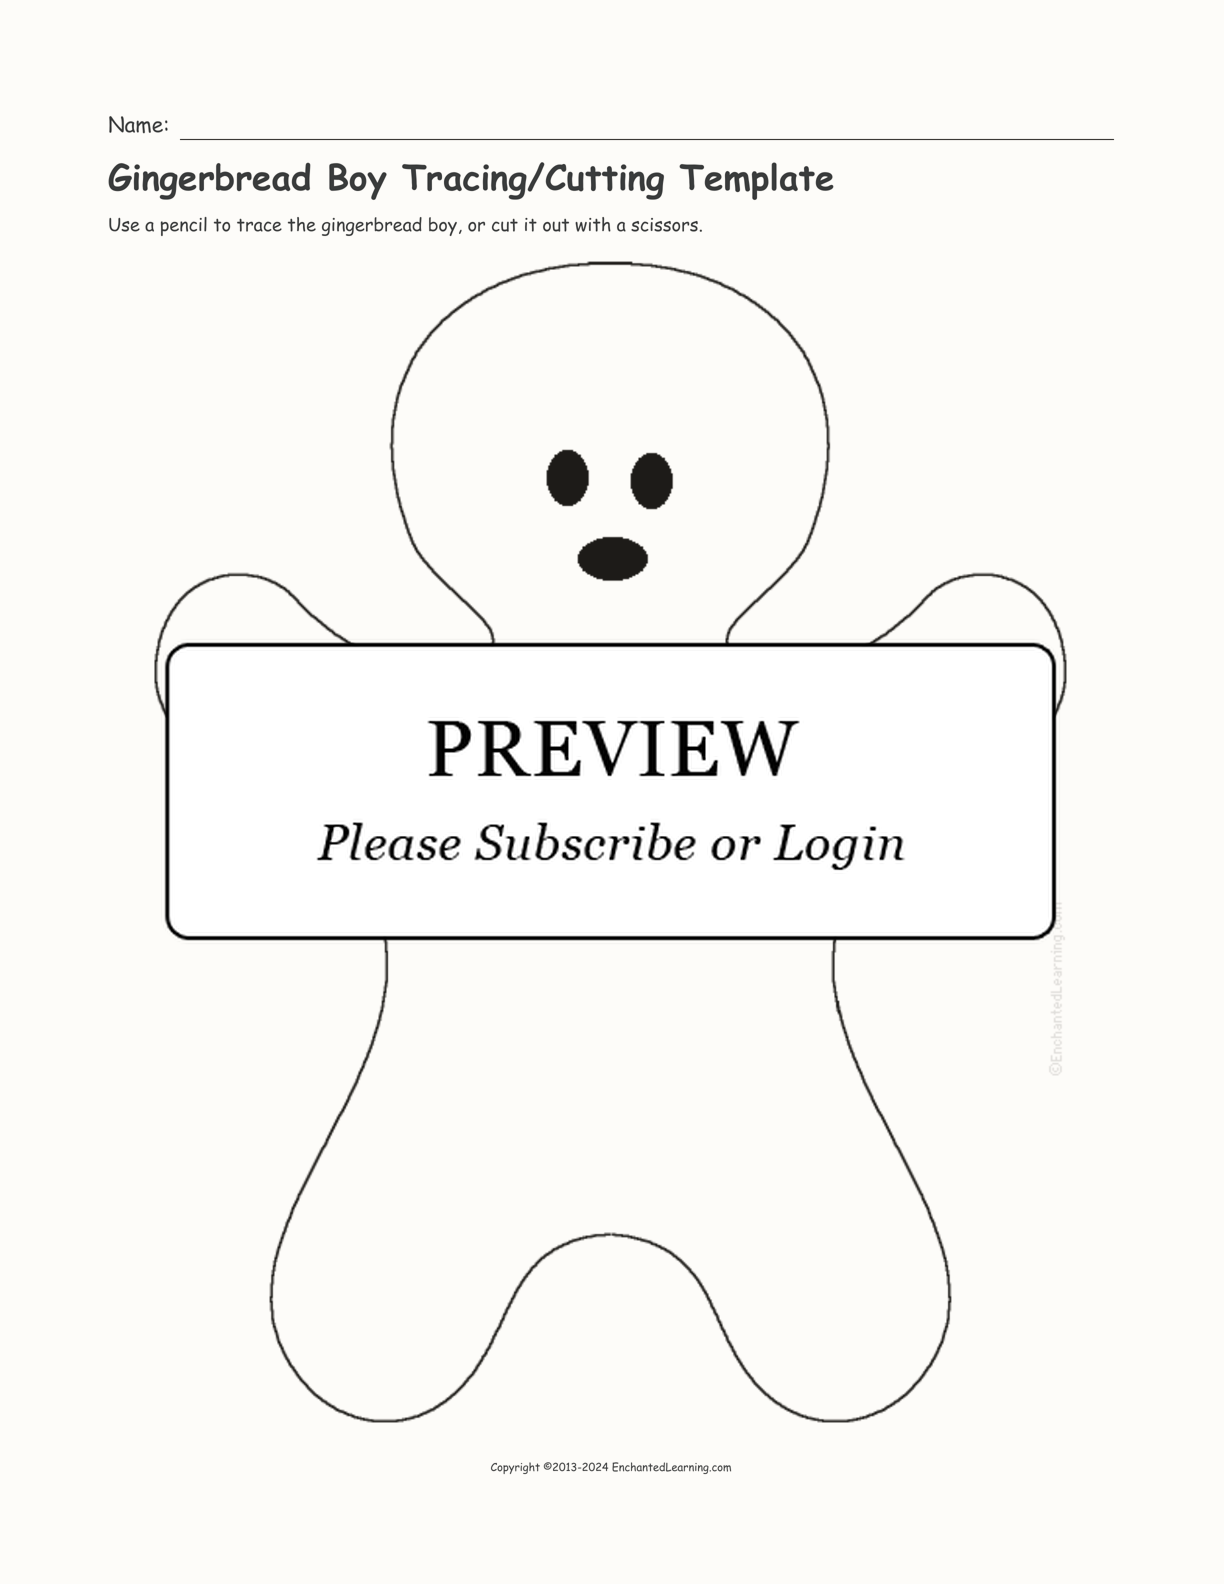 Gingerbread Boy Tracing/Cutting Template interactive printout page 1